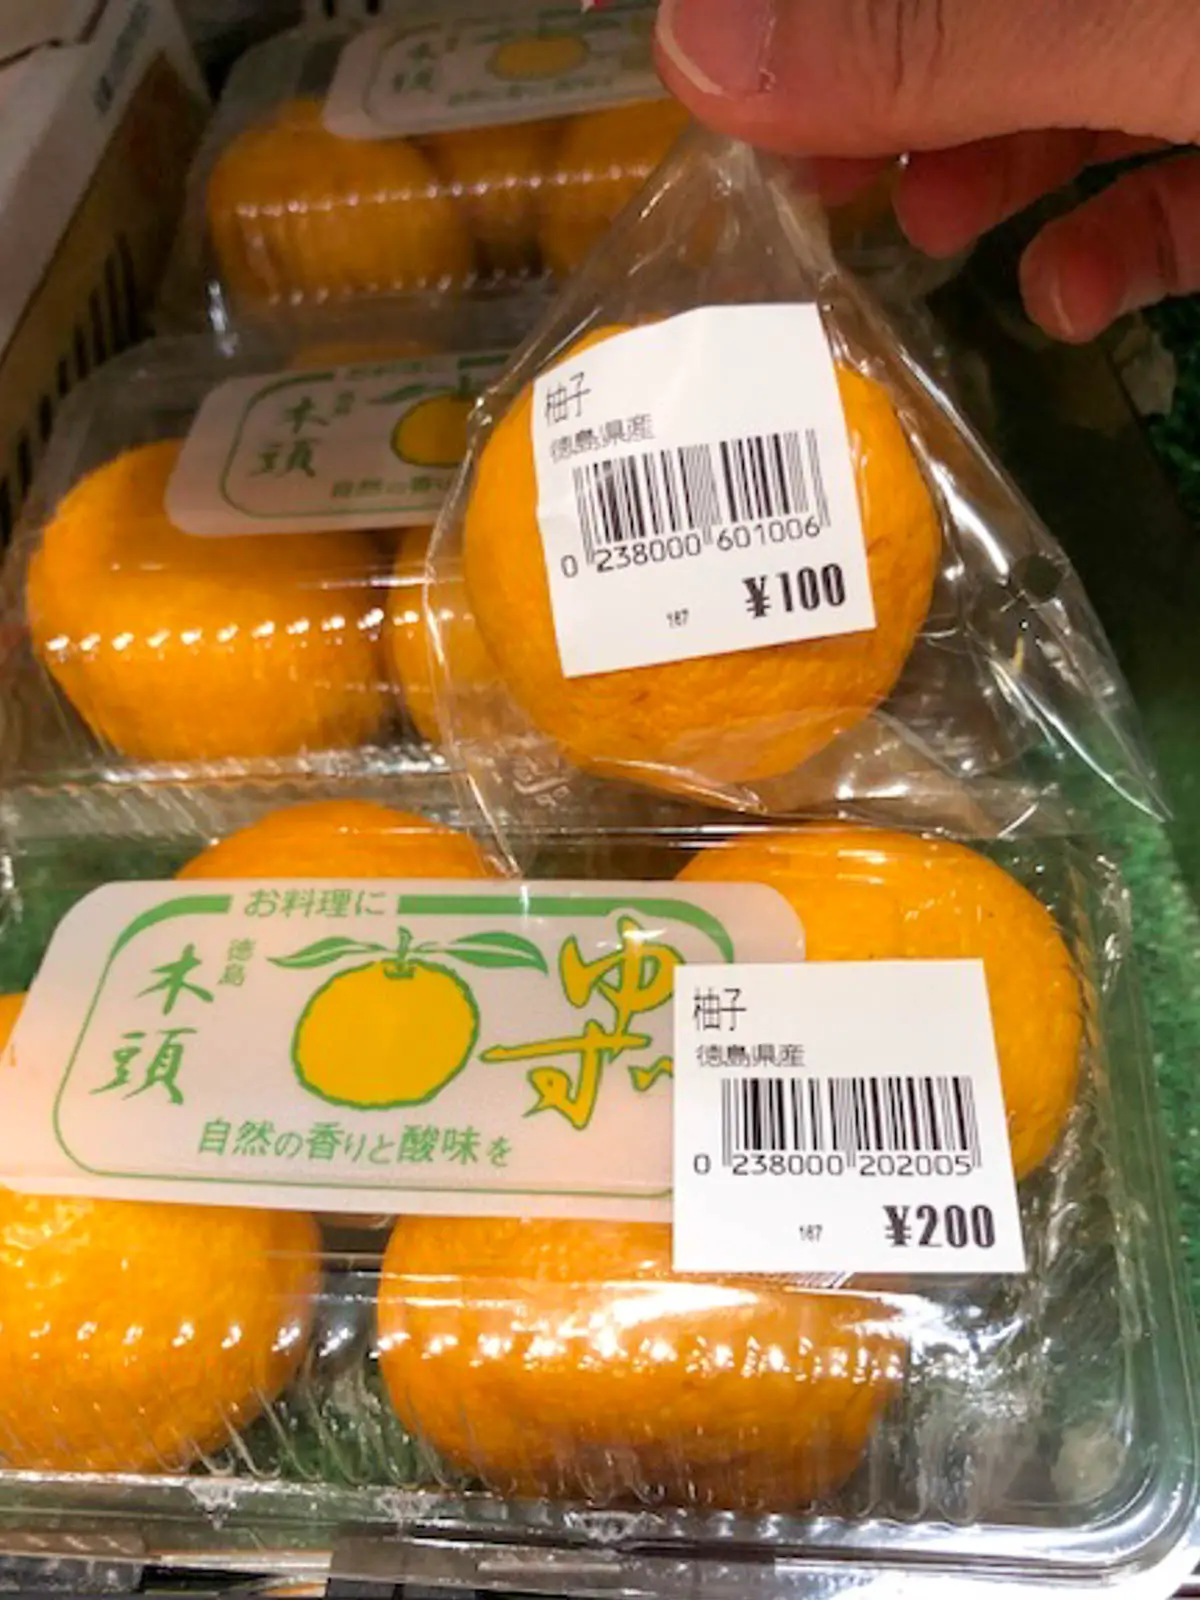 Yuzu (Japanese citrus) in plastic containers for sale, with price labels on them.